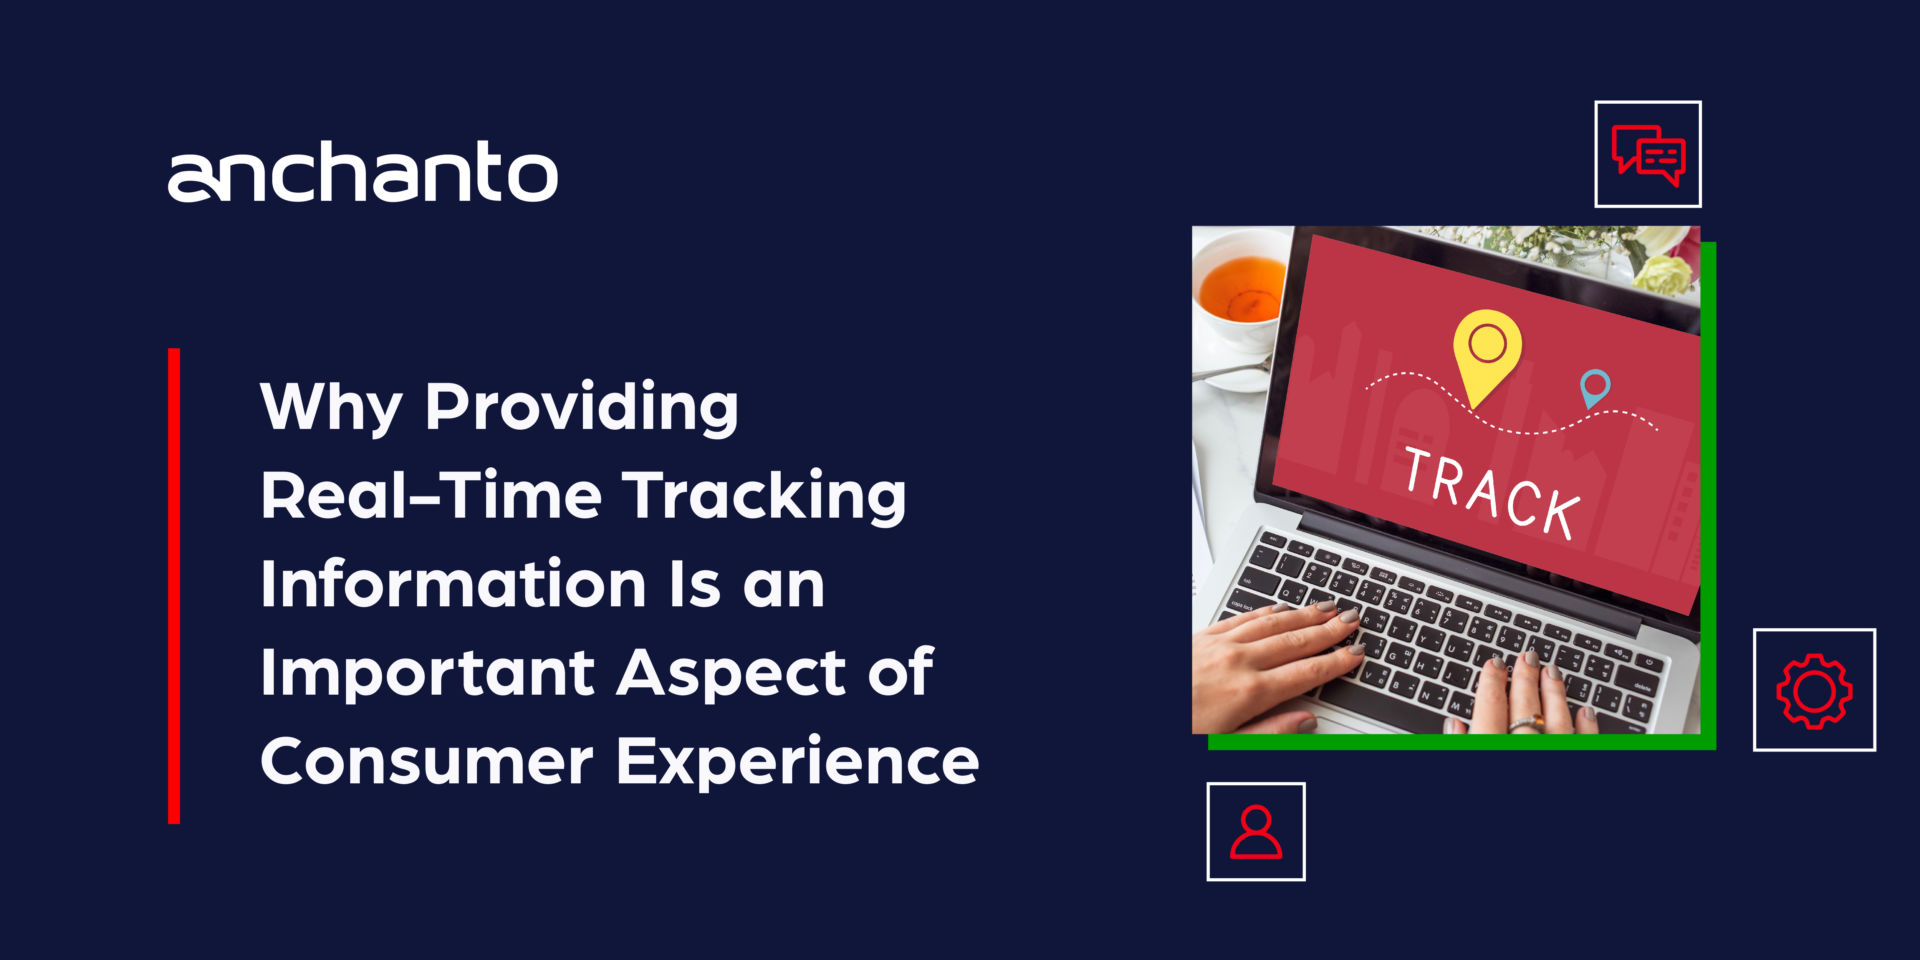 Why Providing Real-Time Tracking Information is an Important Aspect of Consumer Experience